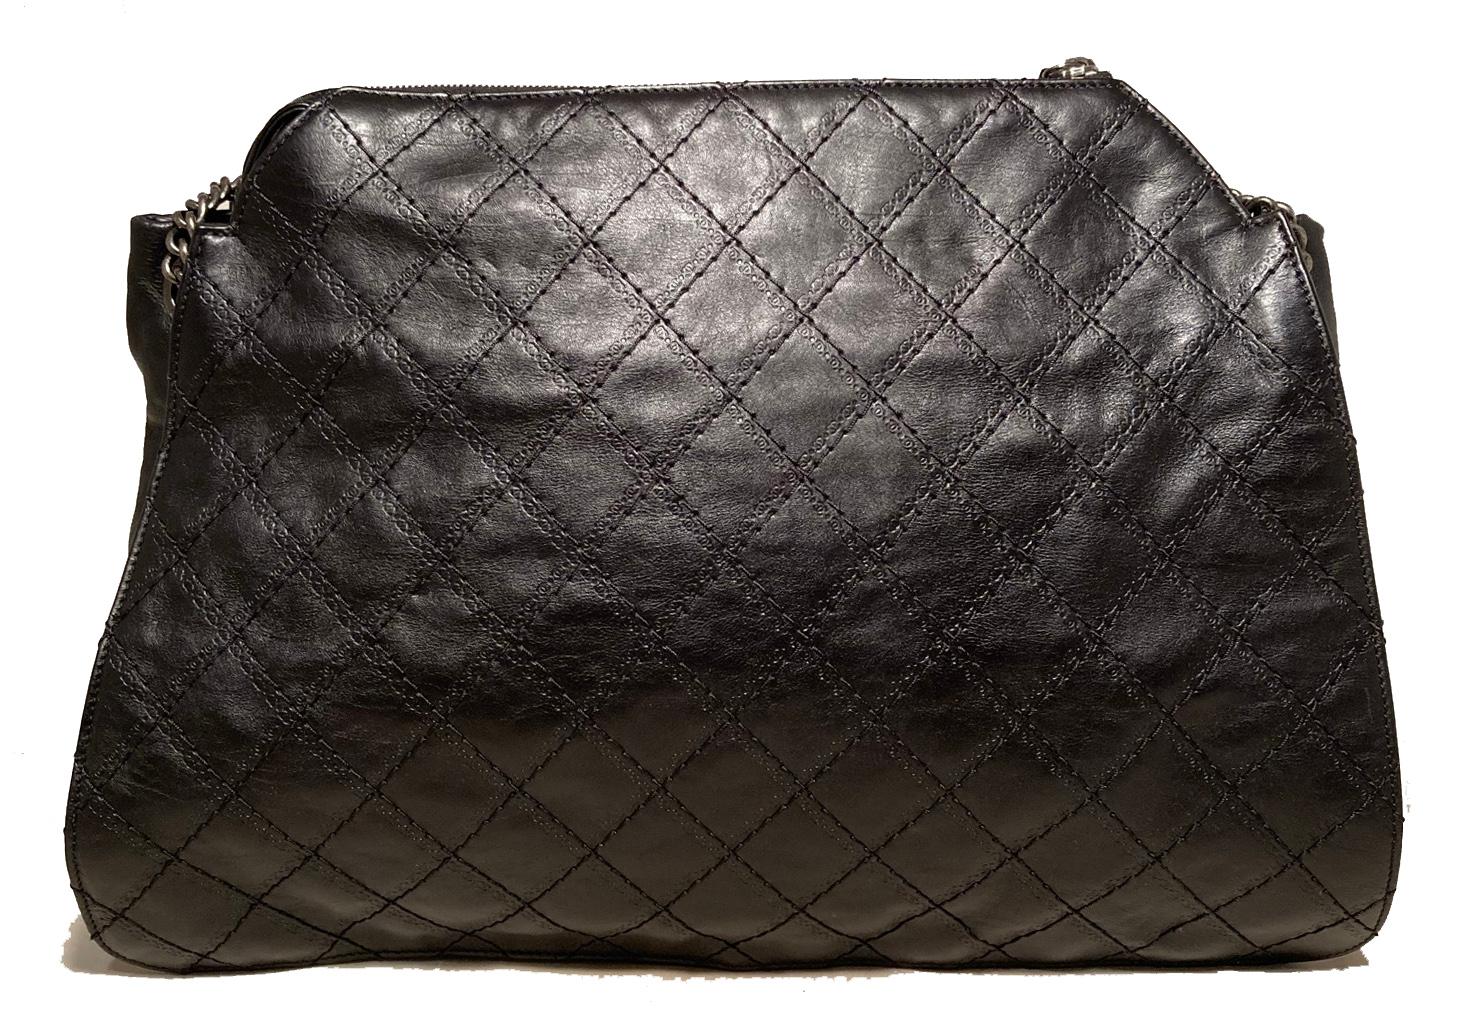 Chanel Black Leather Crave Tote Bag in excellent condition. Black calfskin leather exterior trimmed with ruthenium hardware. Exterior leather features unique embossed pattern along signature diamond quilted pattern. Chain and leather shoulder strap